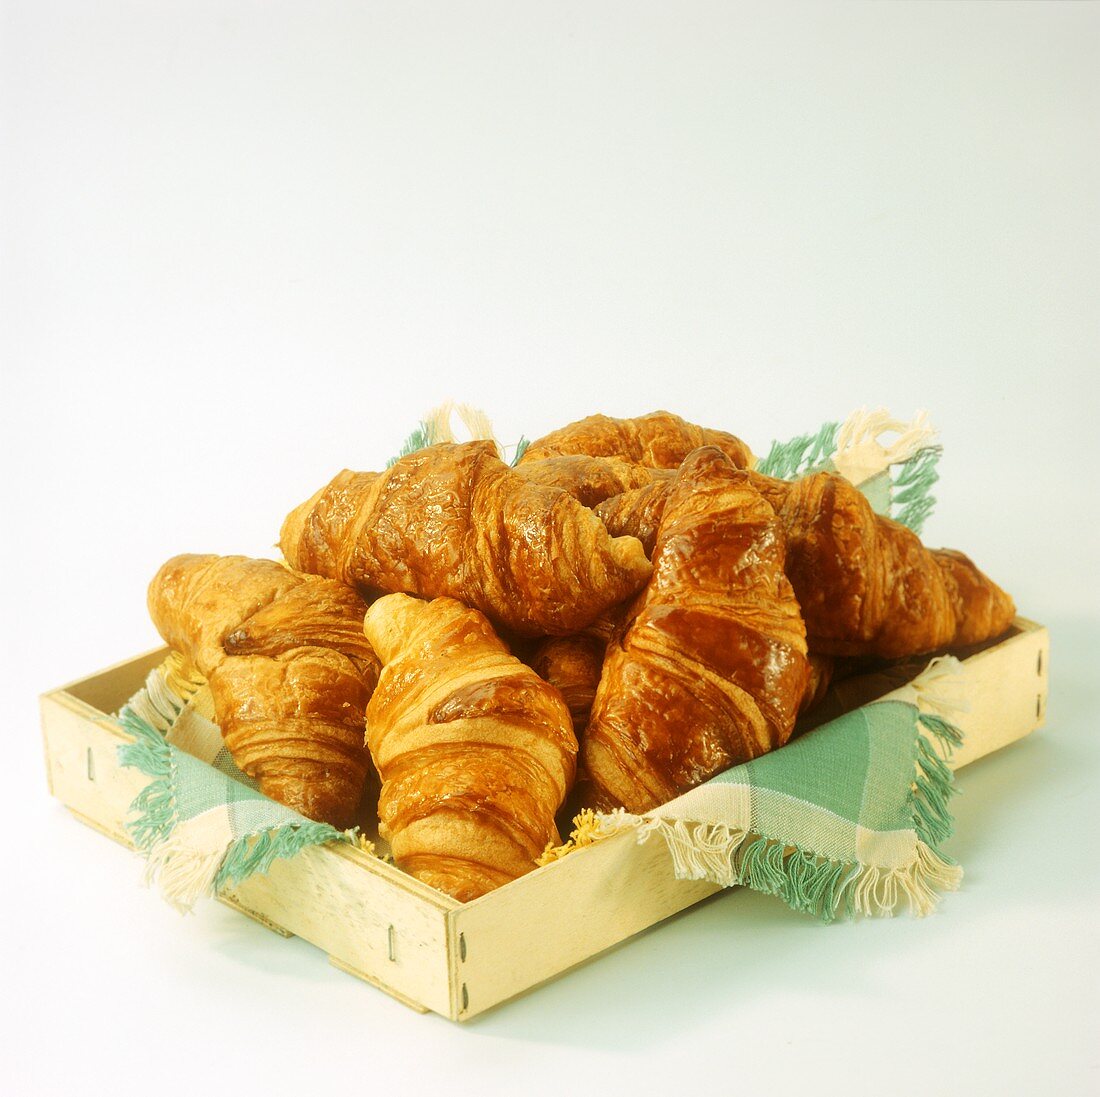 French butter croissants in a wooden box